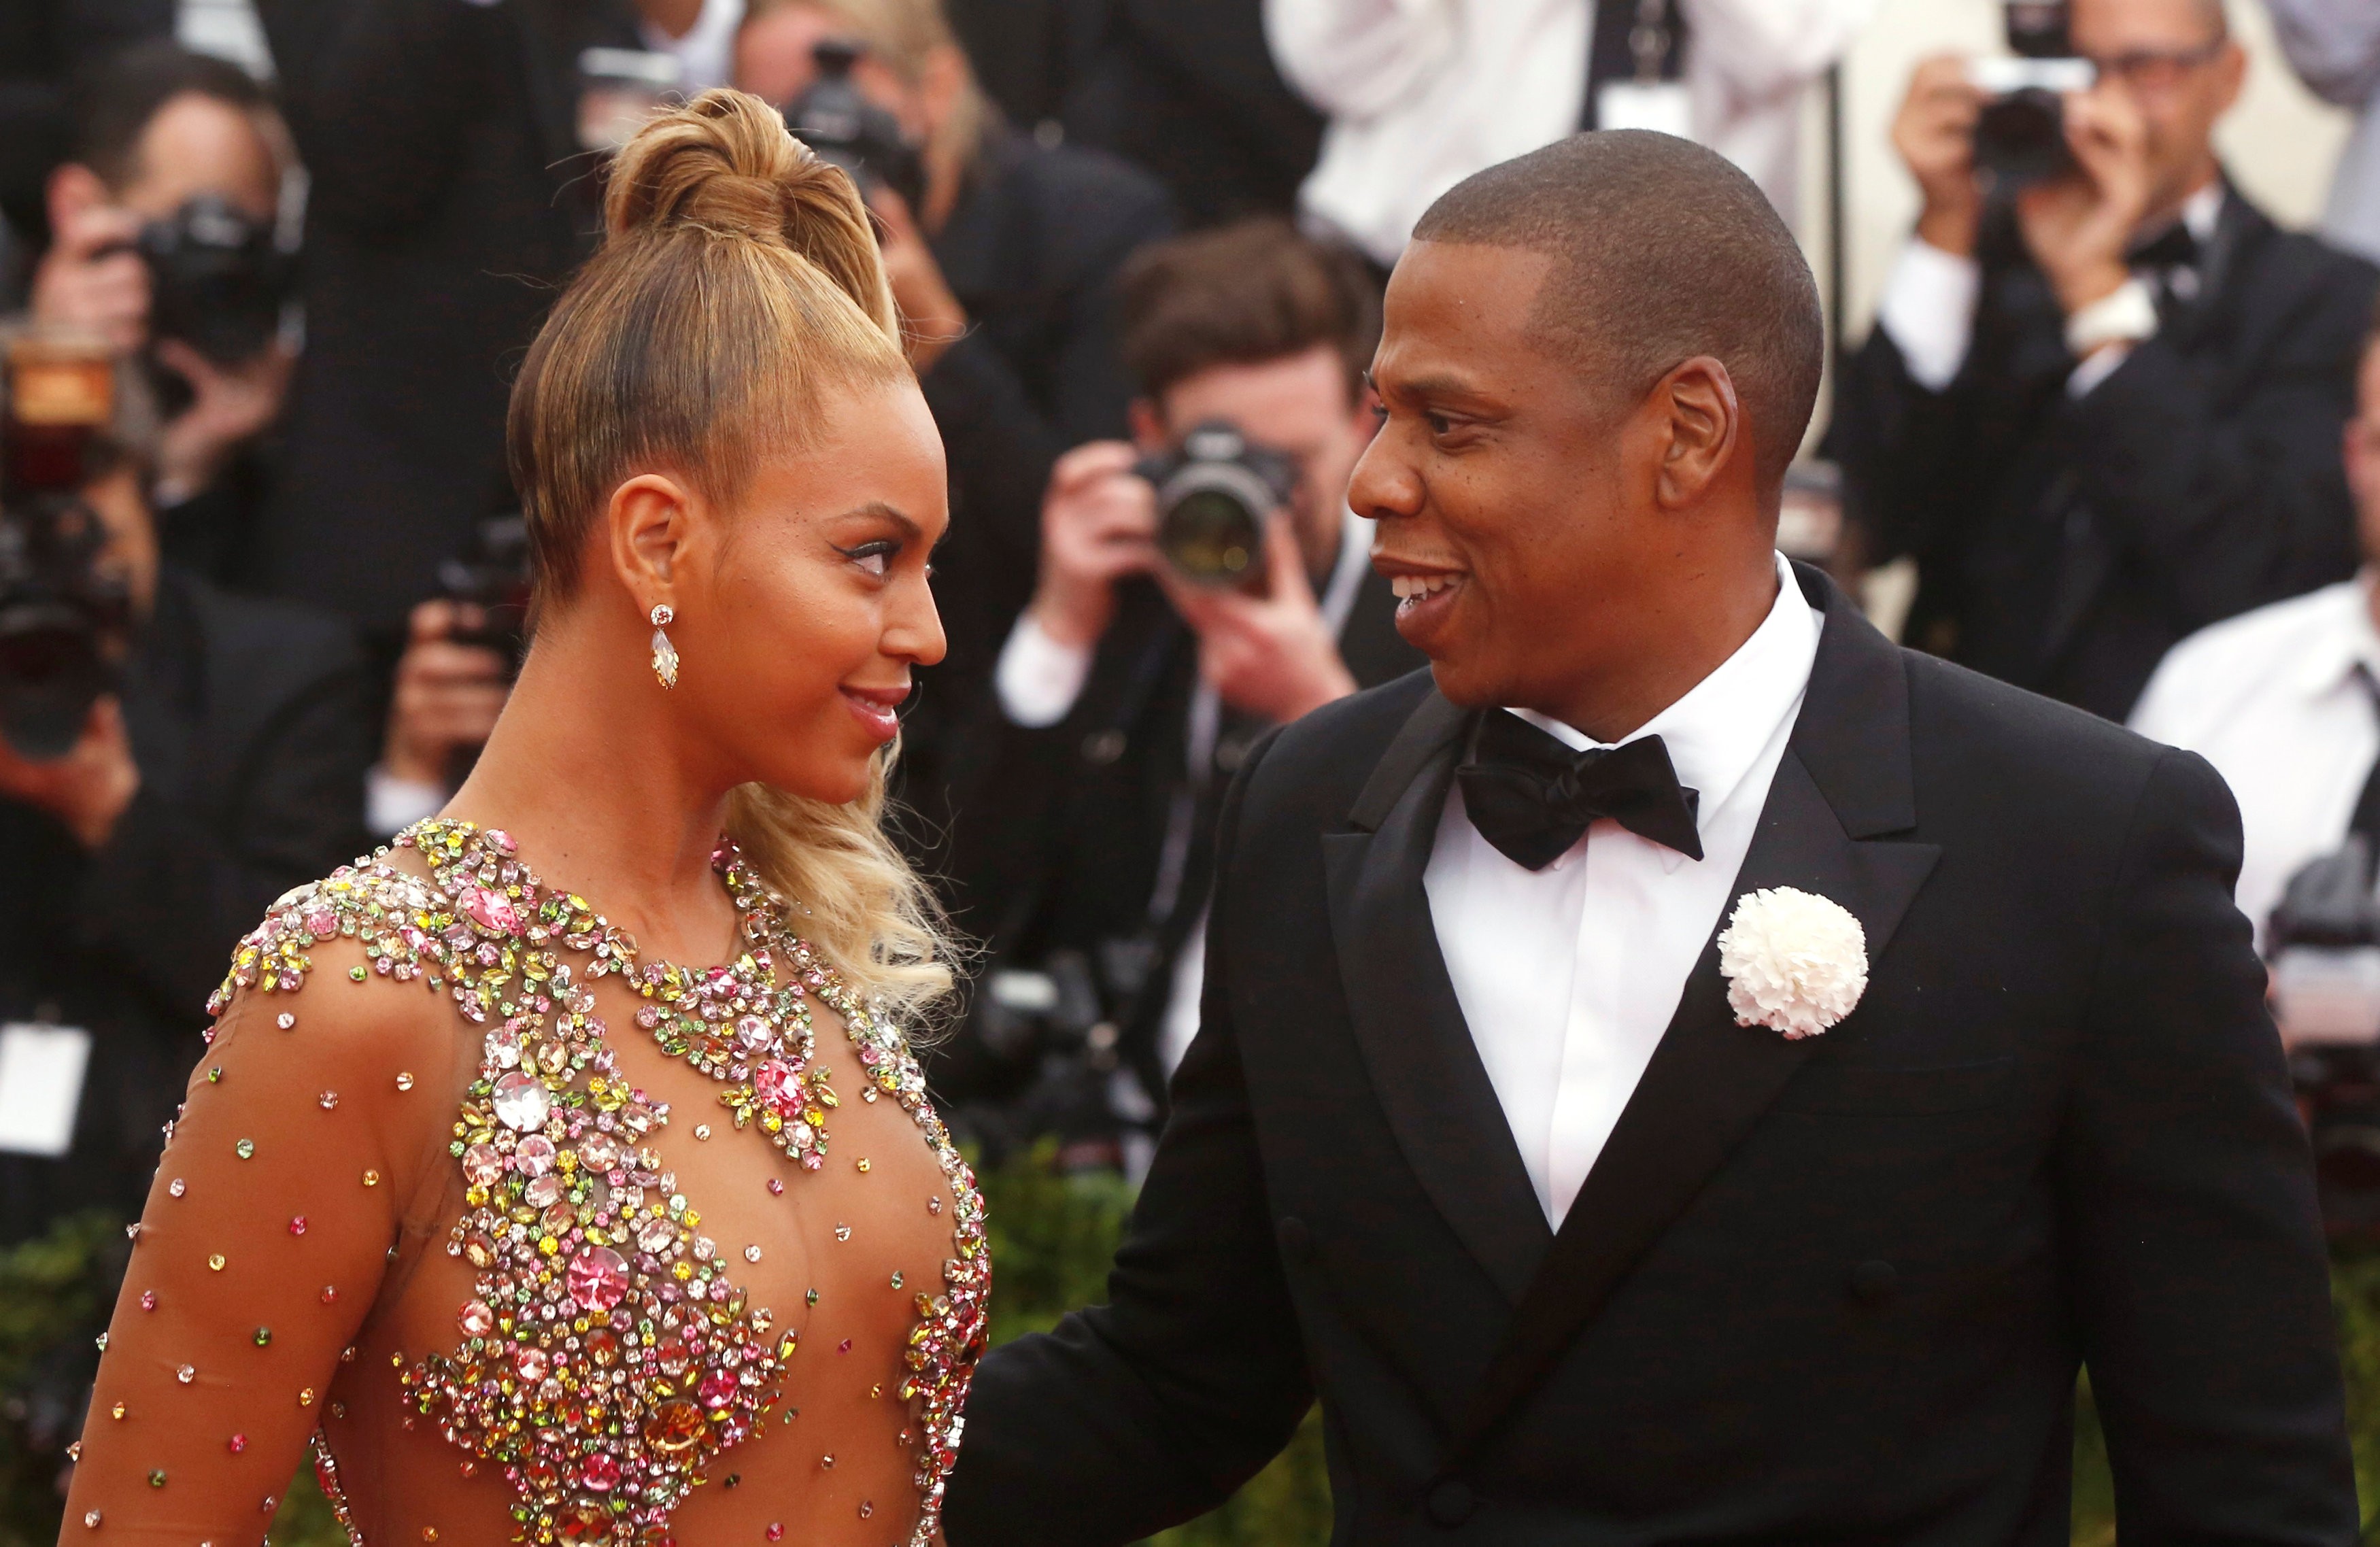 Beyoncé and Jay-Z have launched a competition to reward one fan with free tickets for life to their concerts – if they adopt a vegan diet. The prize is being run in conjunction with The Greenprint Project, a vegan campaign started by Beyoncé’s personal trainer Marco Borges. Only adult residents of the United States are eligible to enter. Photo: Reuters